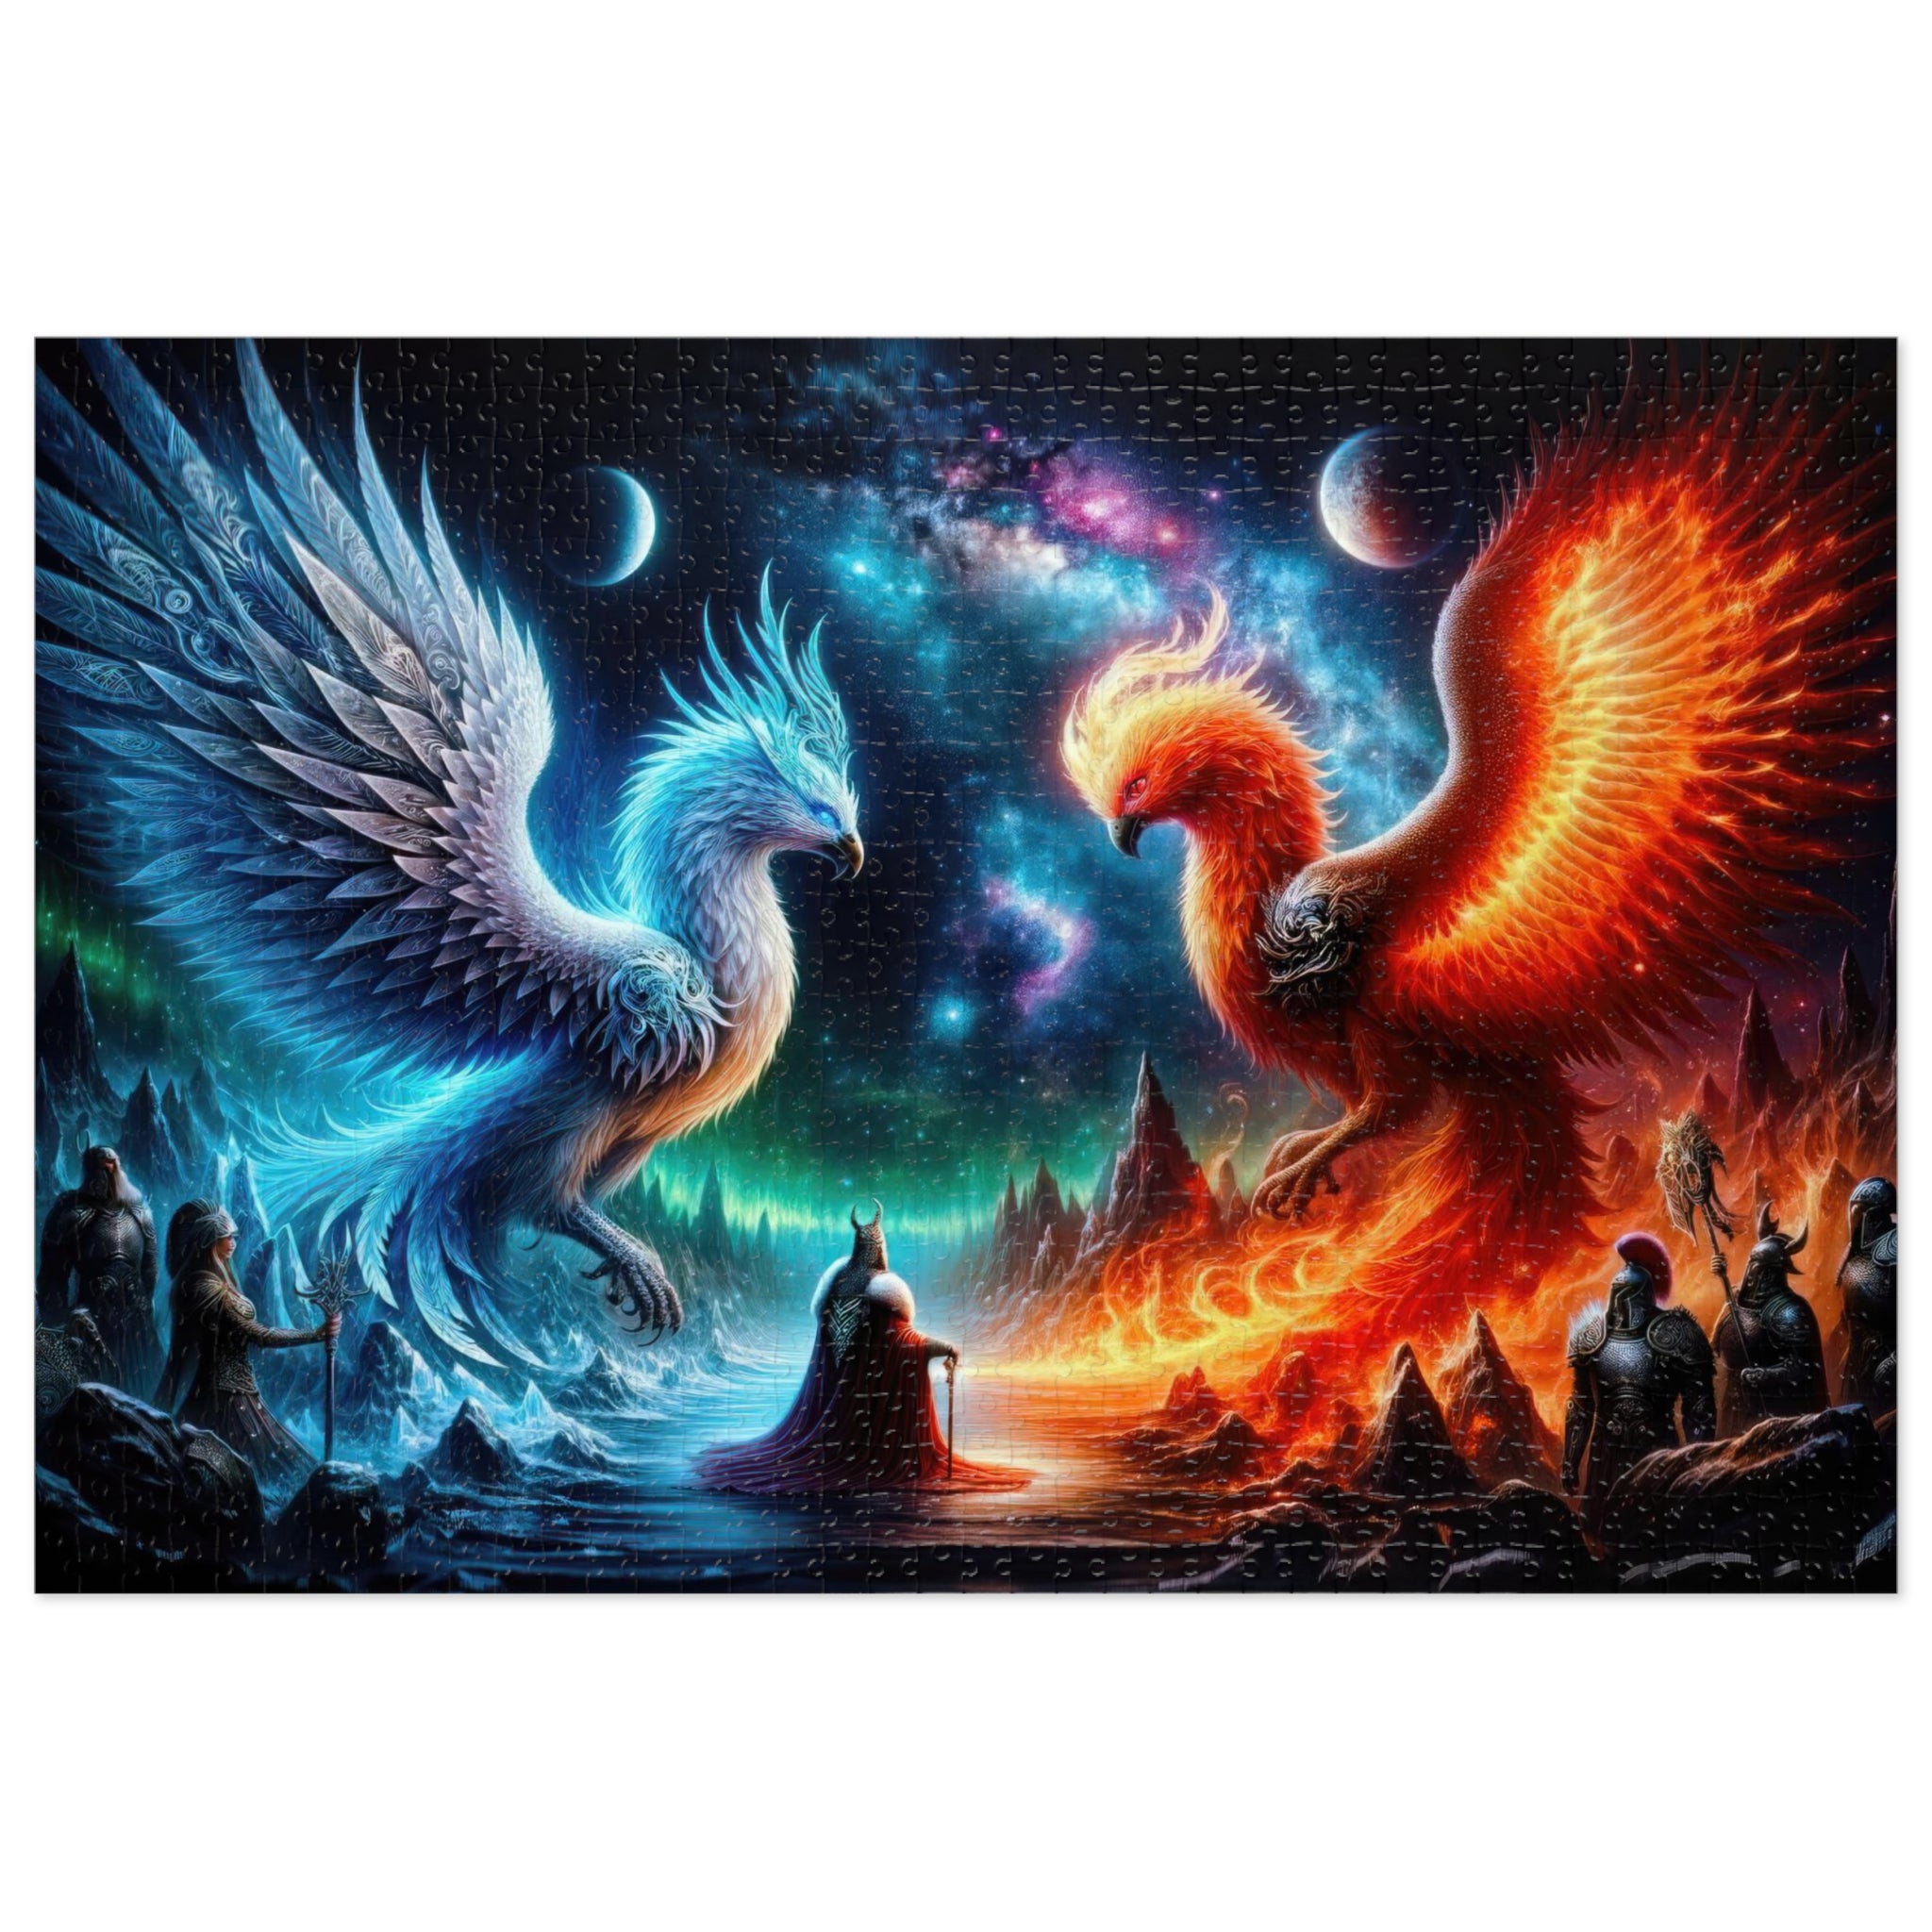 Convergence of Celestial Guardians Jigsaw Puzzle